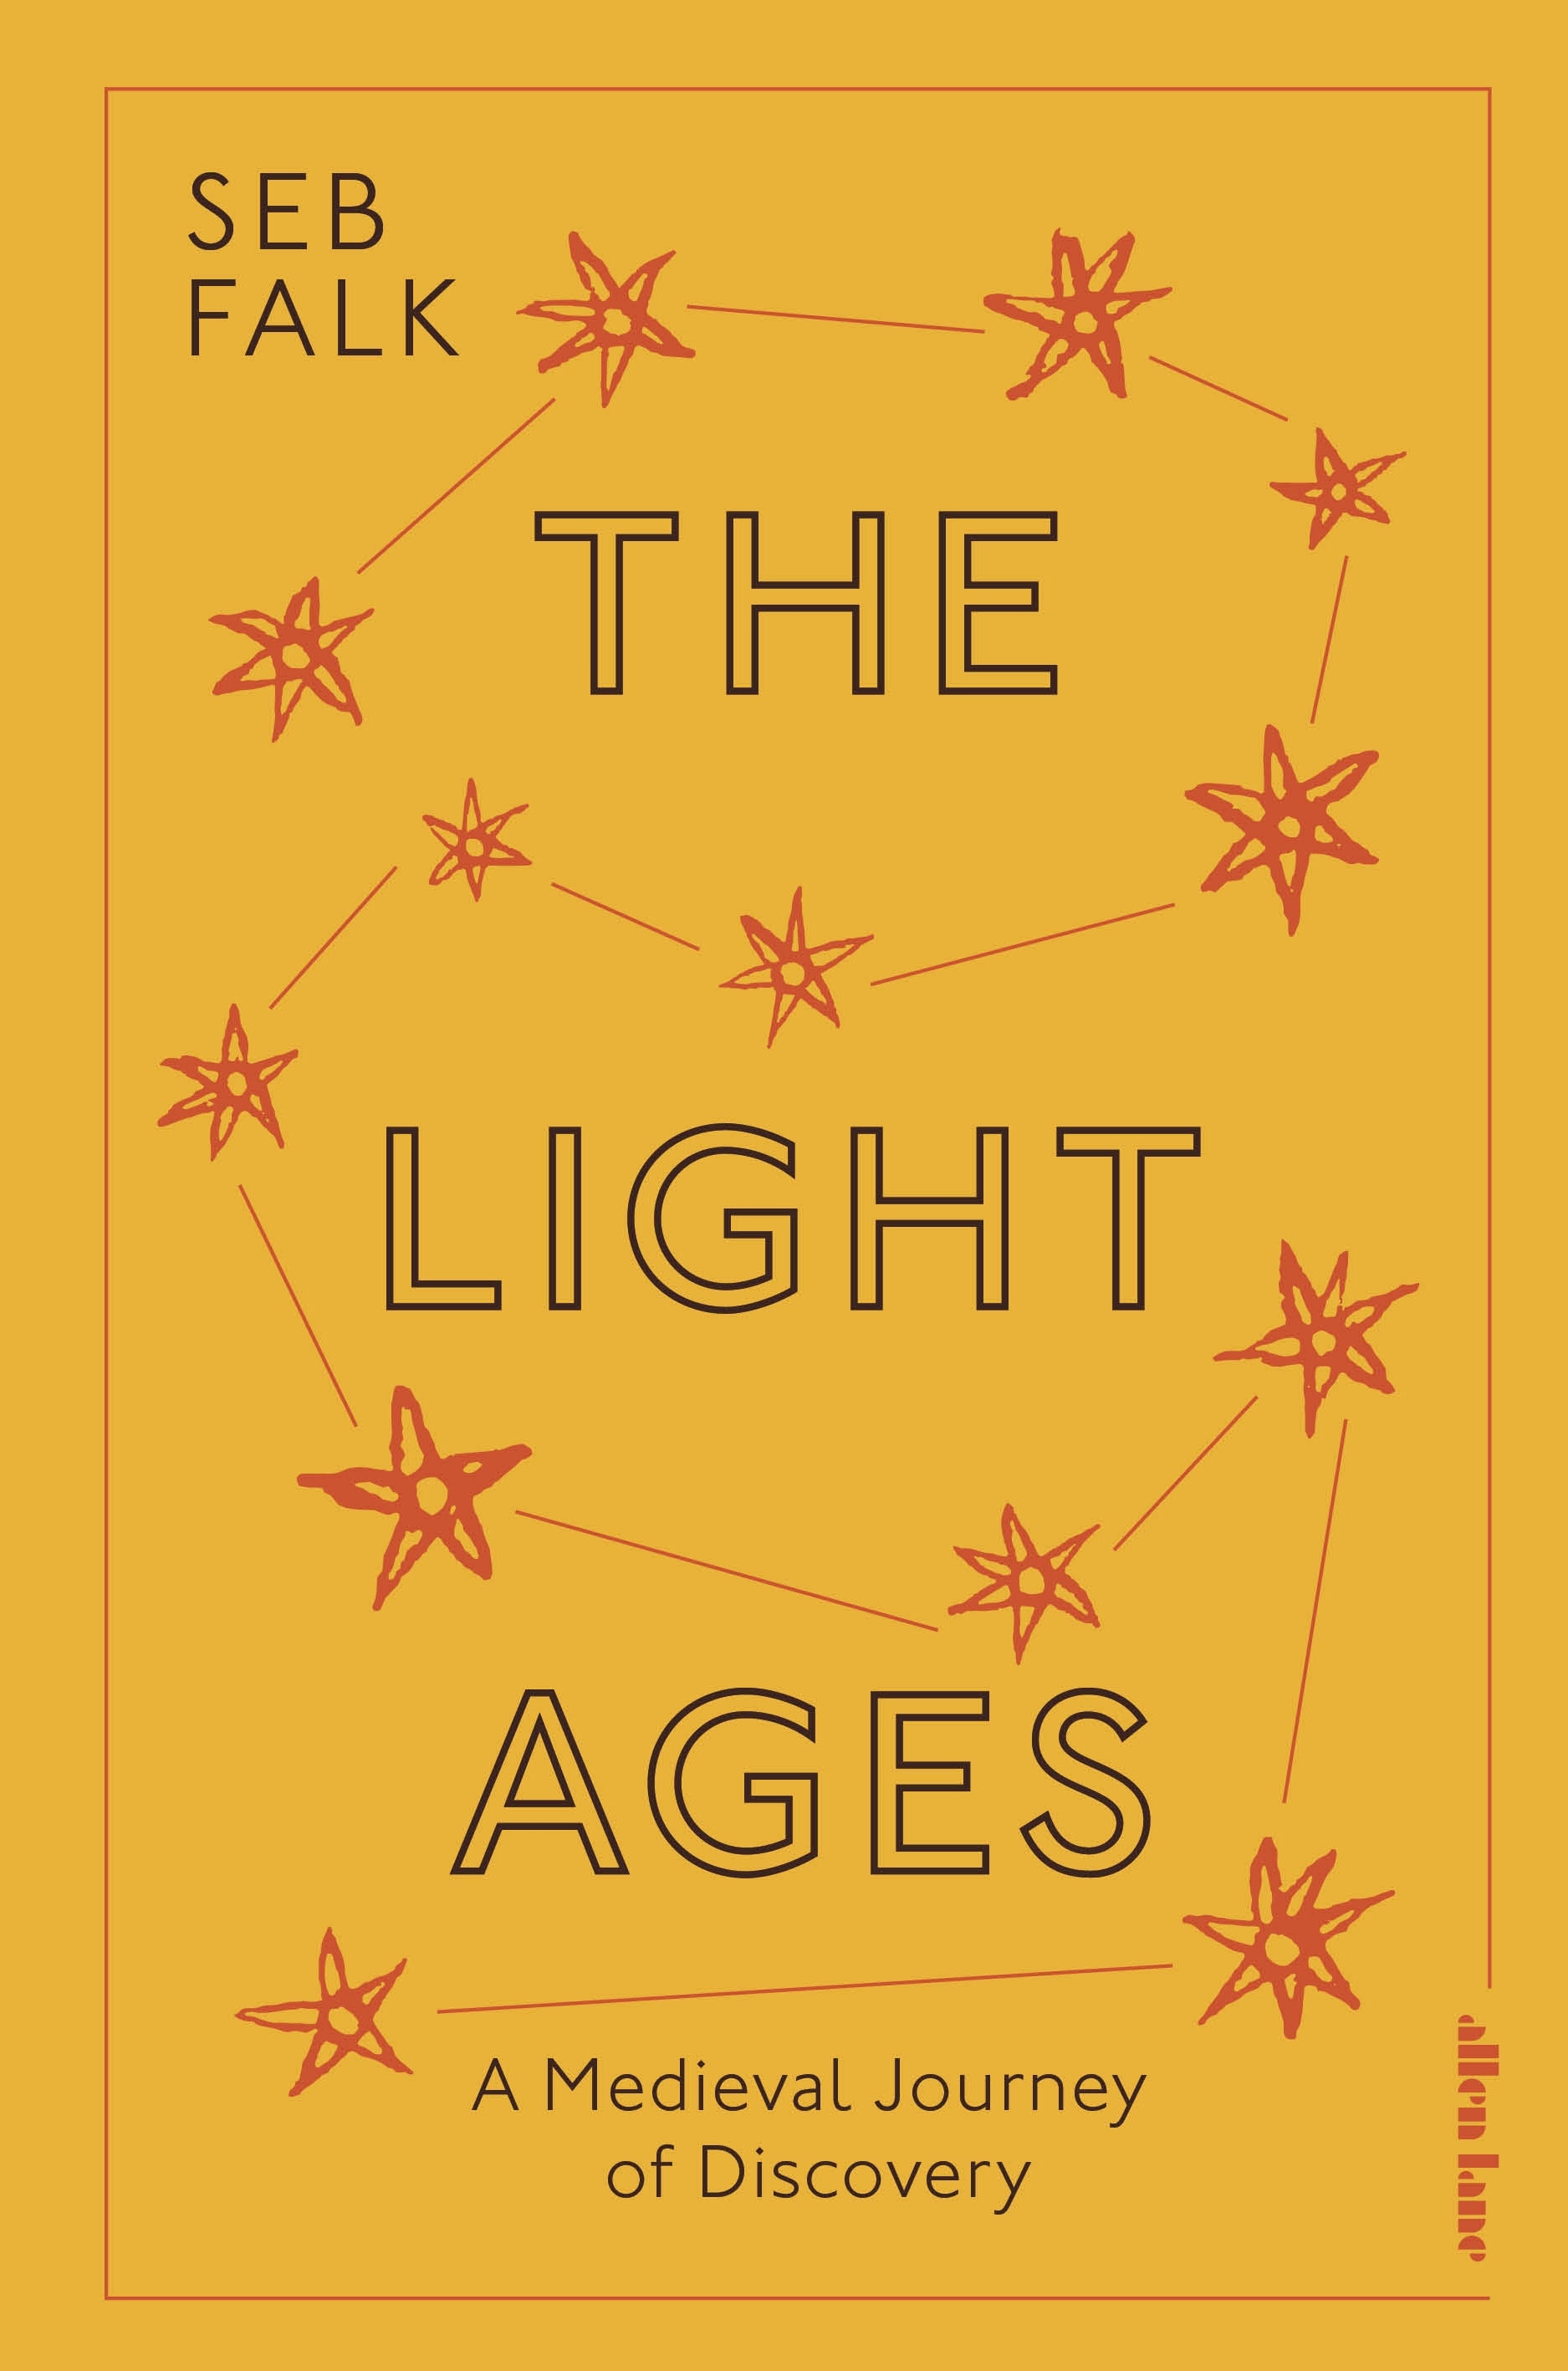 Book “The Light Ages” by Seb Falk — September 24, 2020